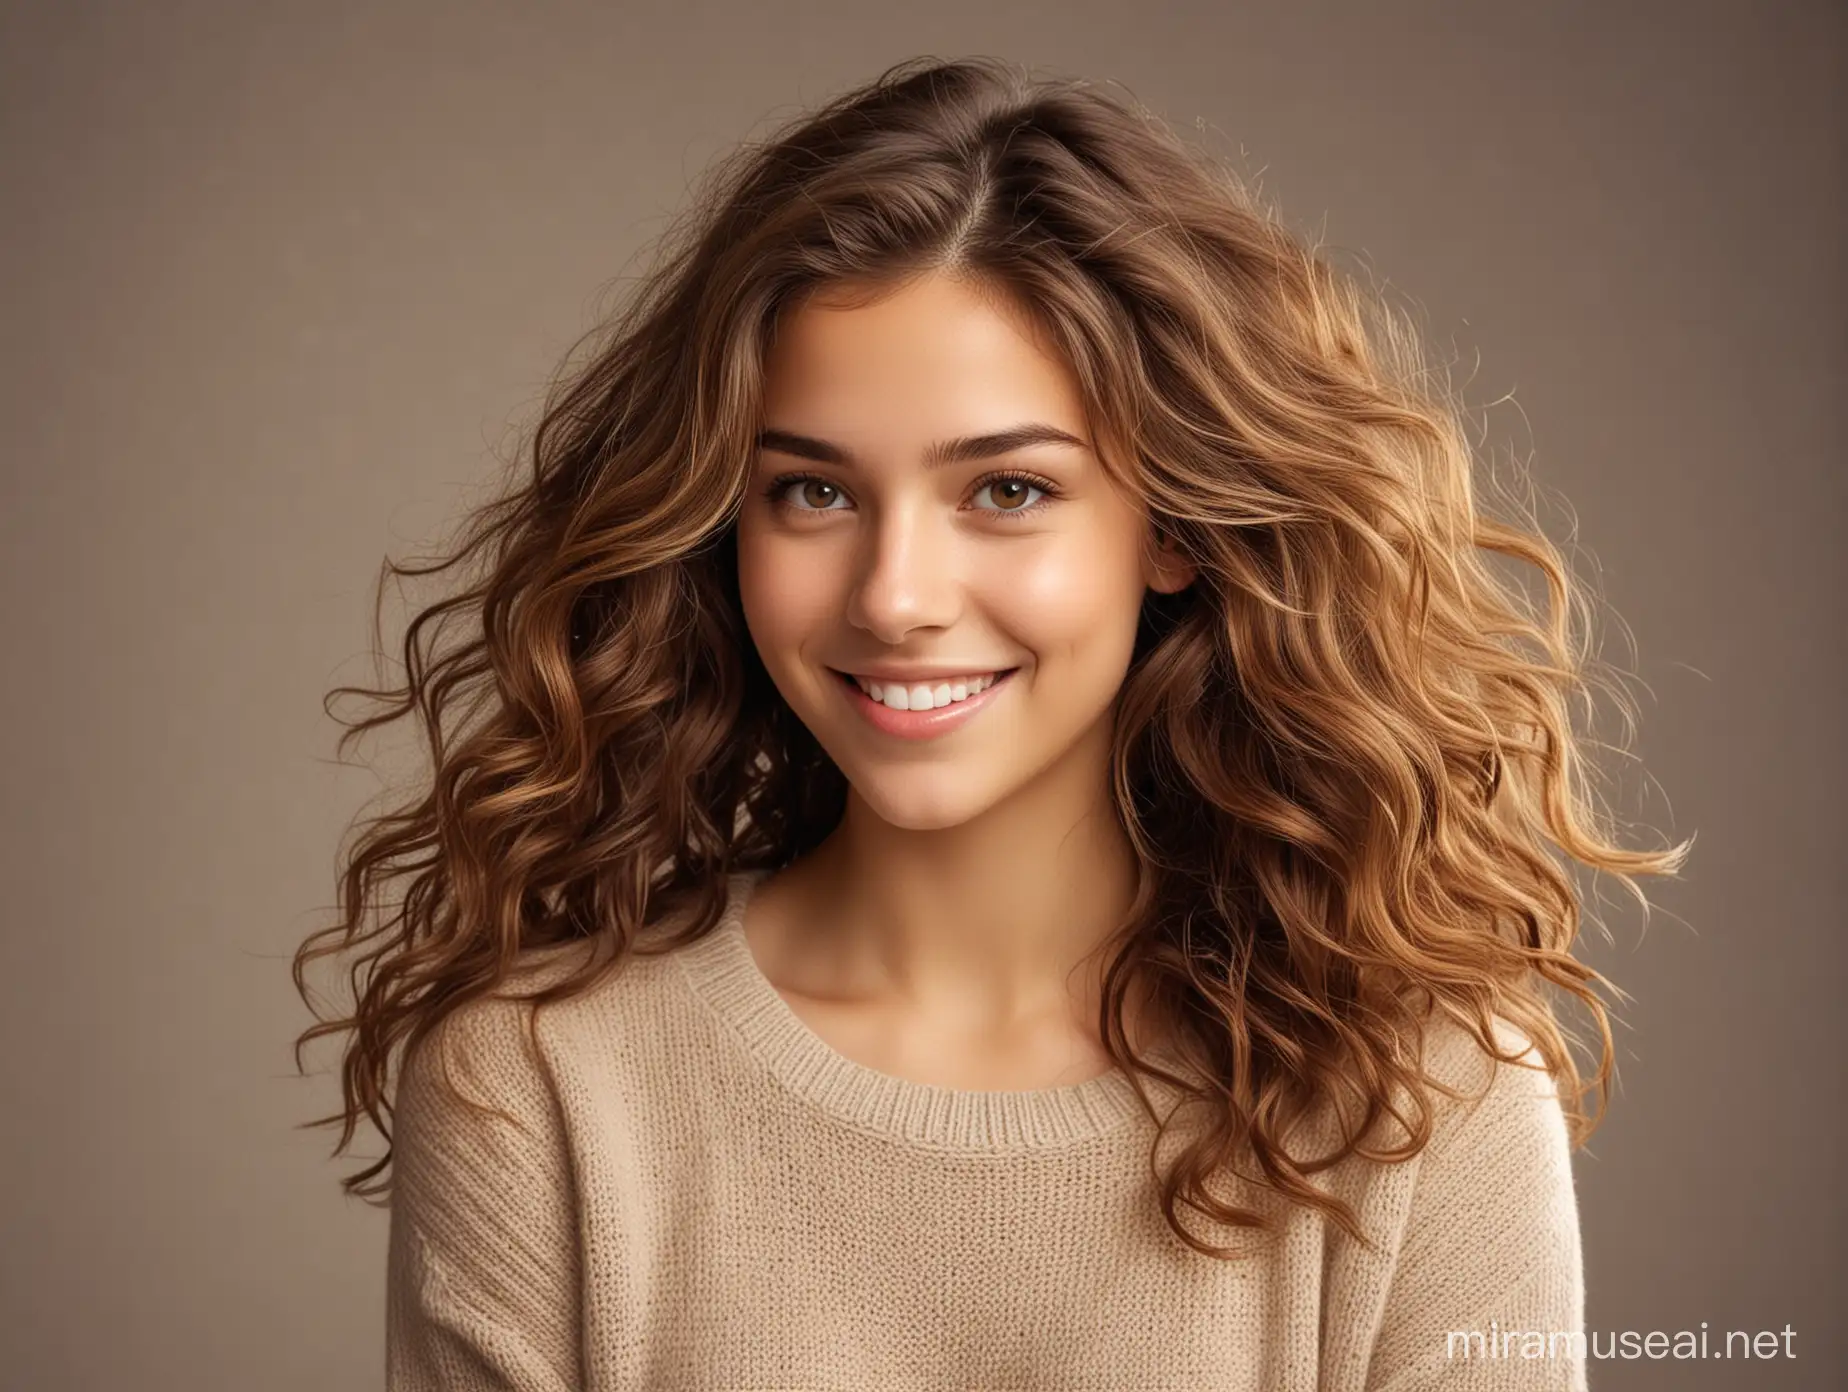 color photo of a captivating young beautiful girl with flowing, luscious hair, dressed in a cozy and stylish casual sweater, against a simple and clean isolated background. The girl's radiant smile and confident gaze reflect her inner beauty and self-assurance. Her hair cascades down in voluminous waves, framing her face and adding to her natural charm. The casual sweater she wears complements her youthful style, with its soft fabric and relaxed fit providing both comfort and a touch of fashionable flair. The isolated background allows the focus to be solely on the girl, emphasizing her beauty and capturing her individuality. This composition celebrates the captivating presence of the young girl, showcasing her grace, confidence, and effortless style. It invites viewers to appreciate the unique beauty of each individual and serves as a reminder that true beauty comes from within.